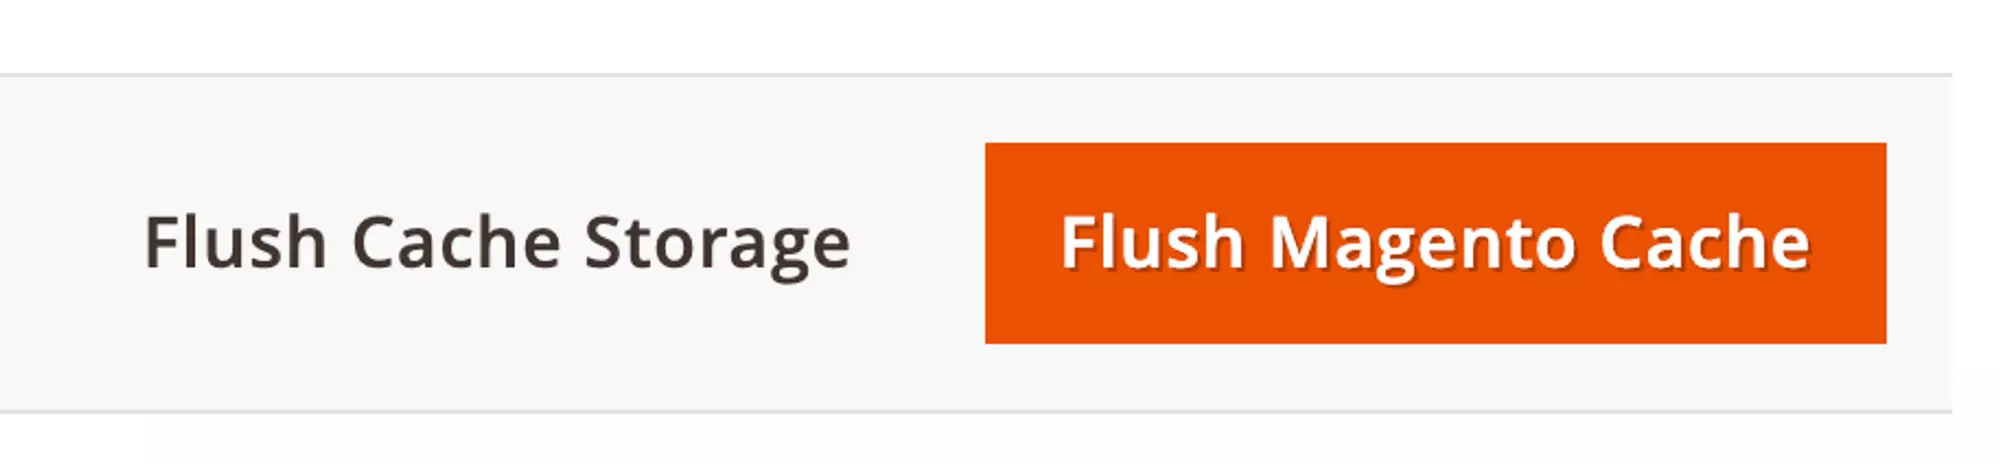 Magento cache buttons